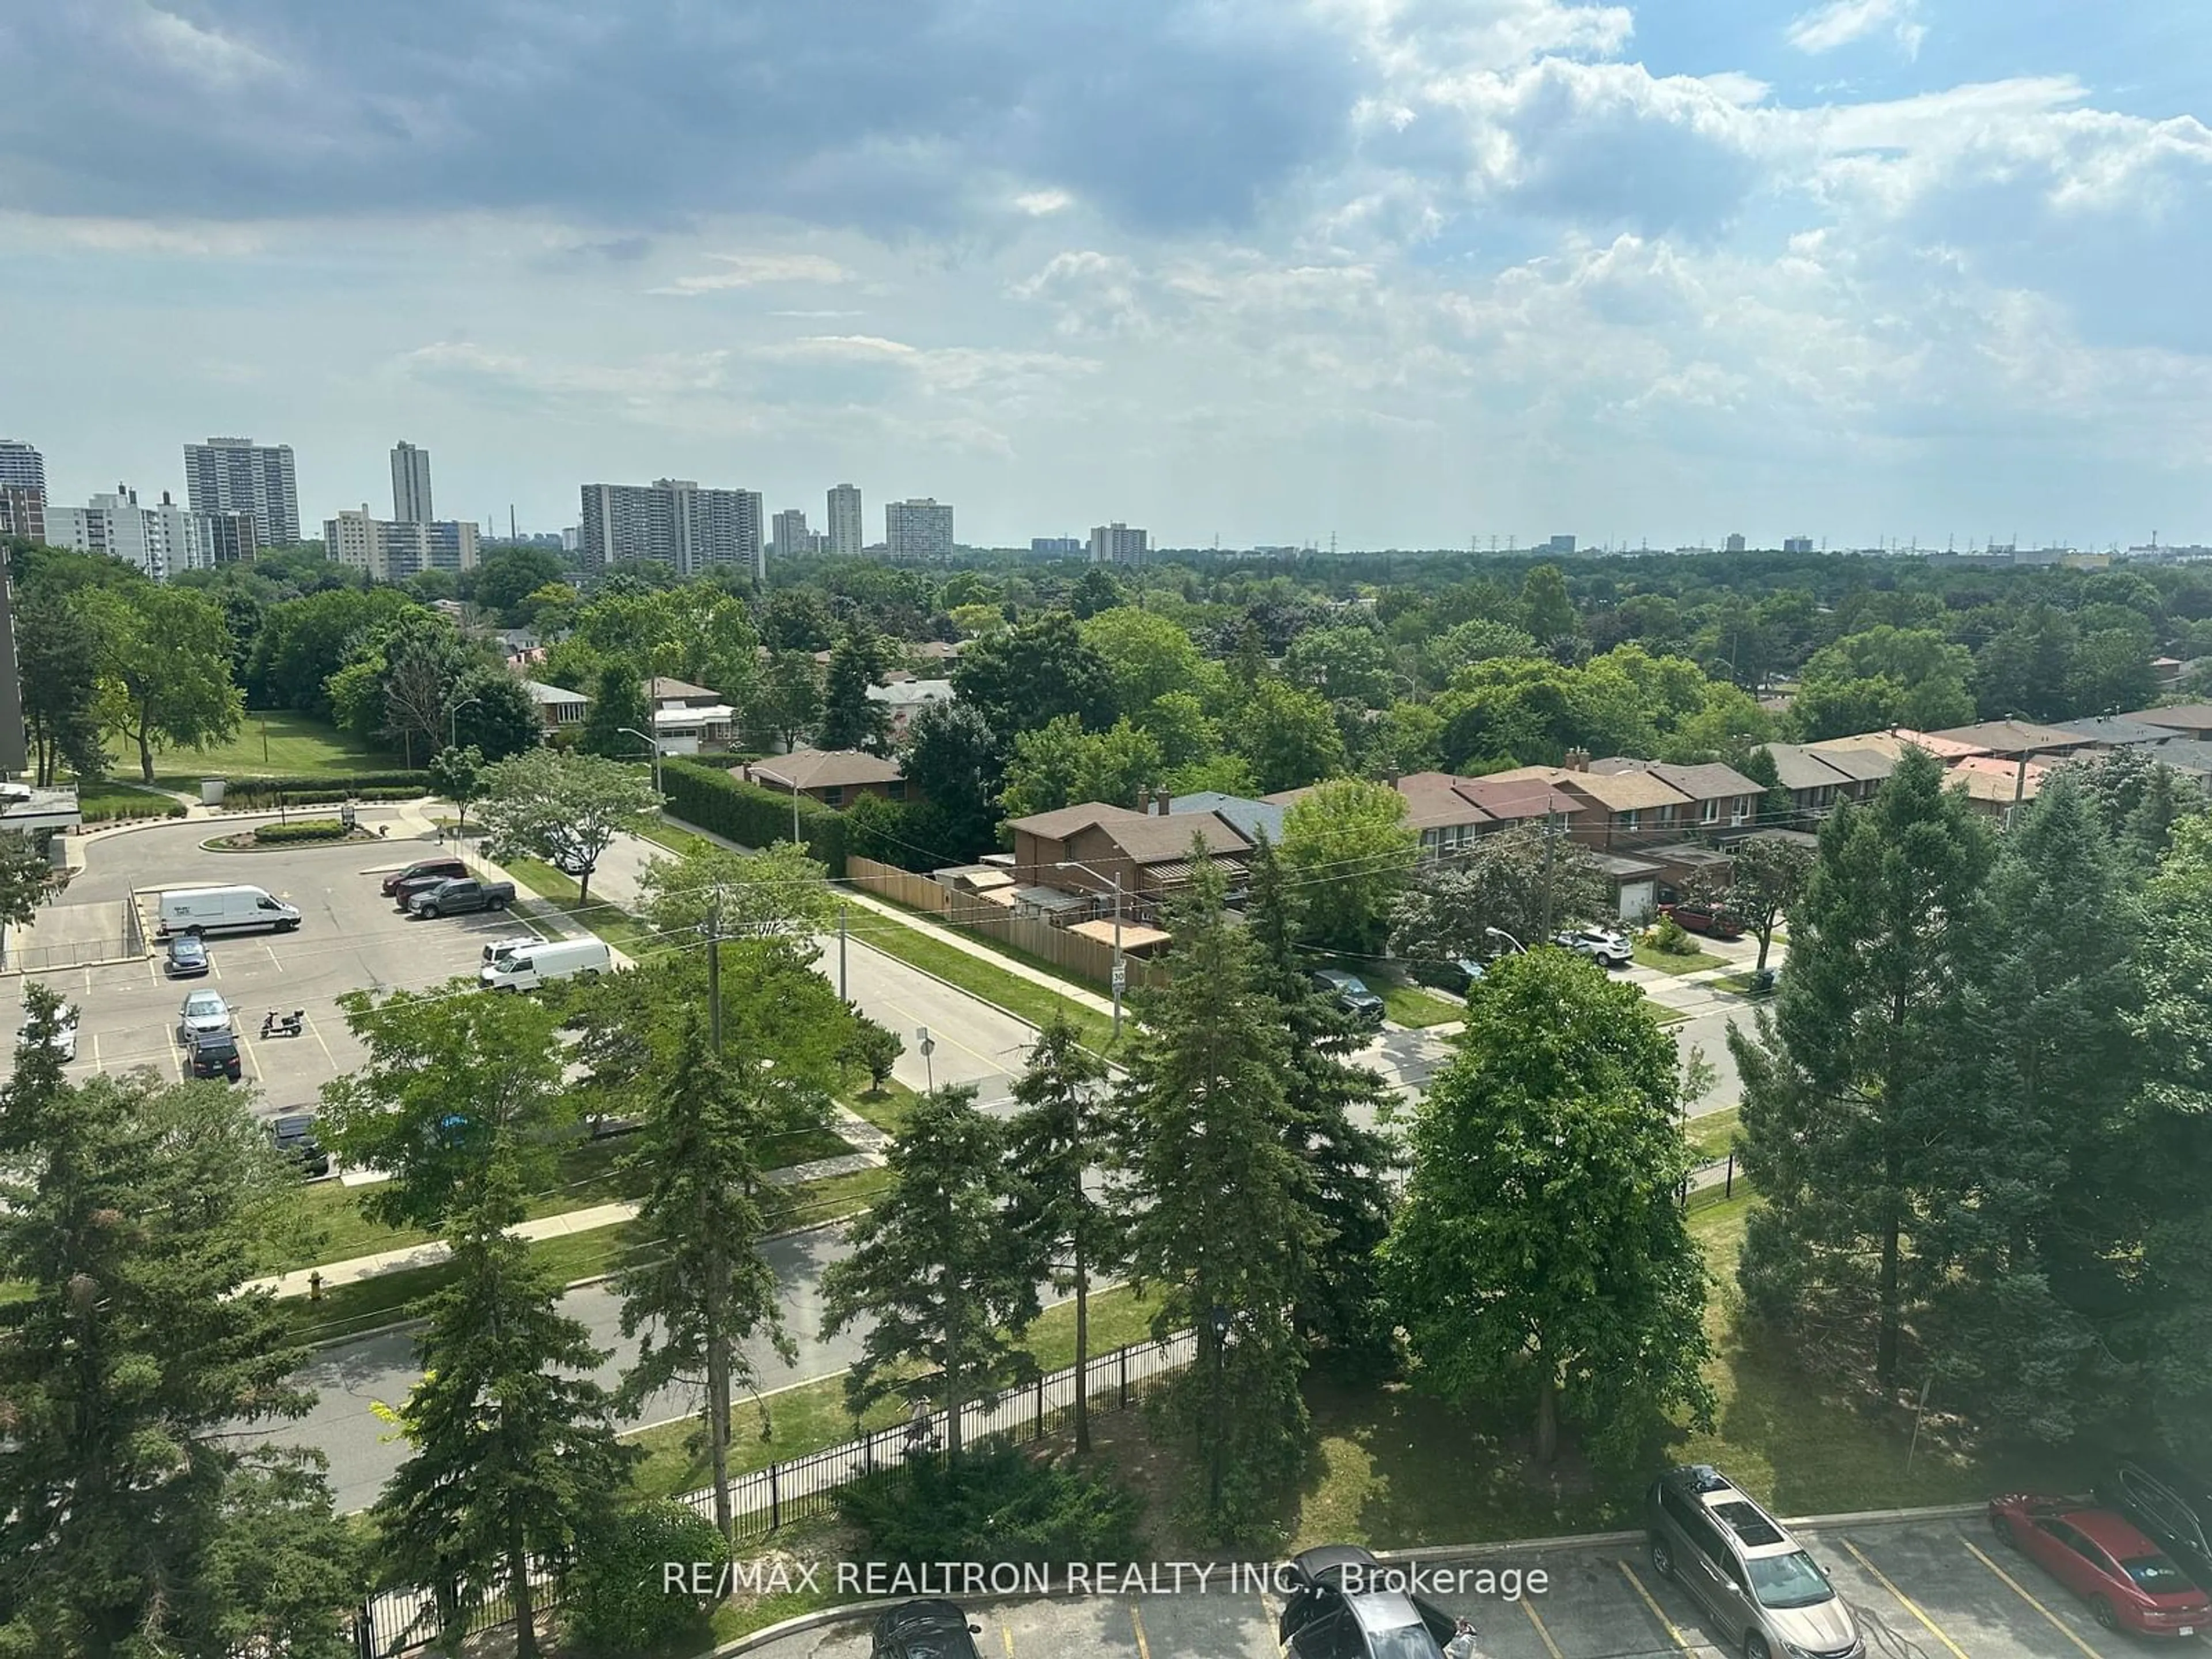 Lakeview for 1121 Steeles Ave #802, Toronto Ontario M2R 2W7